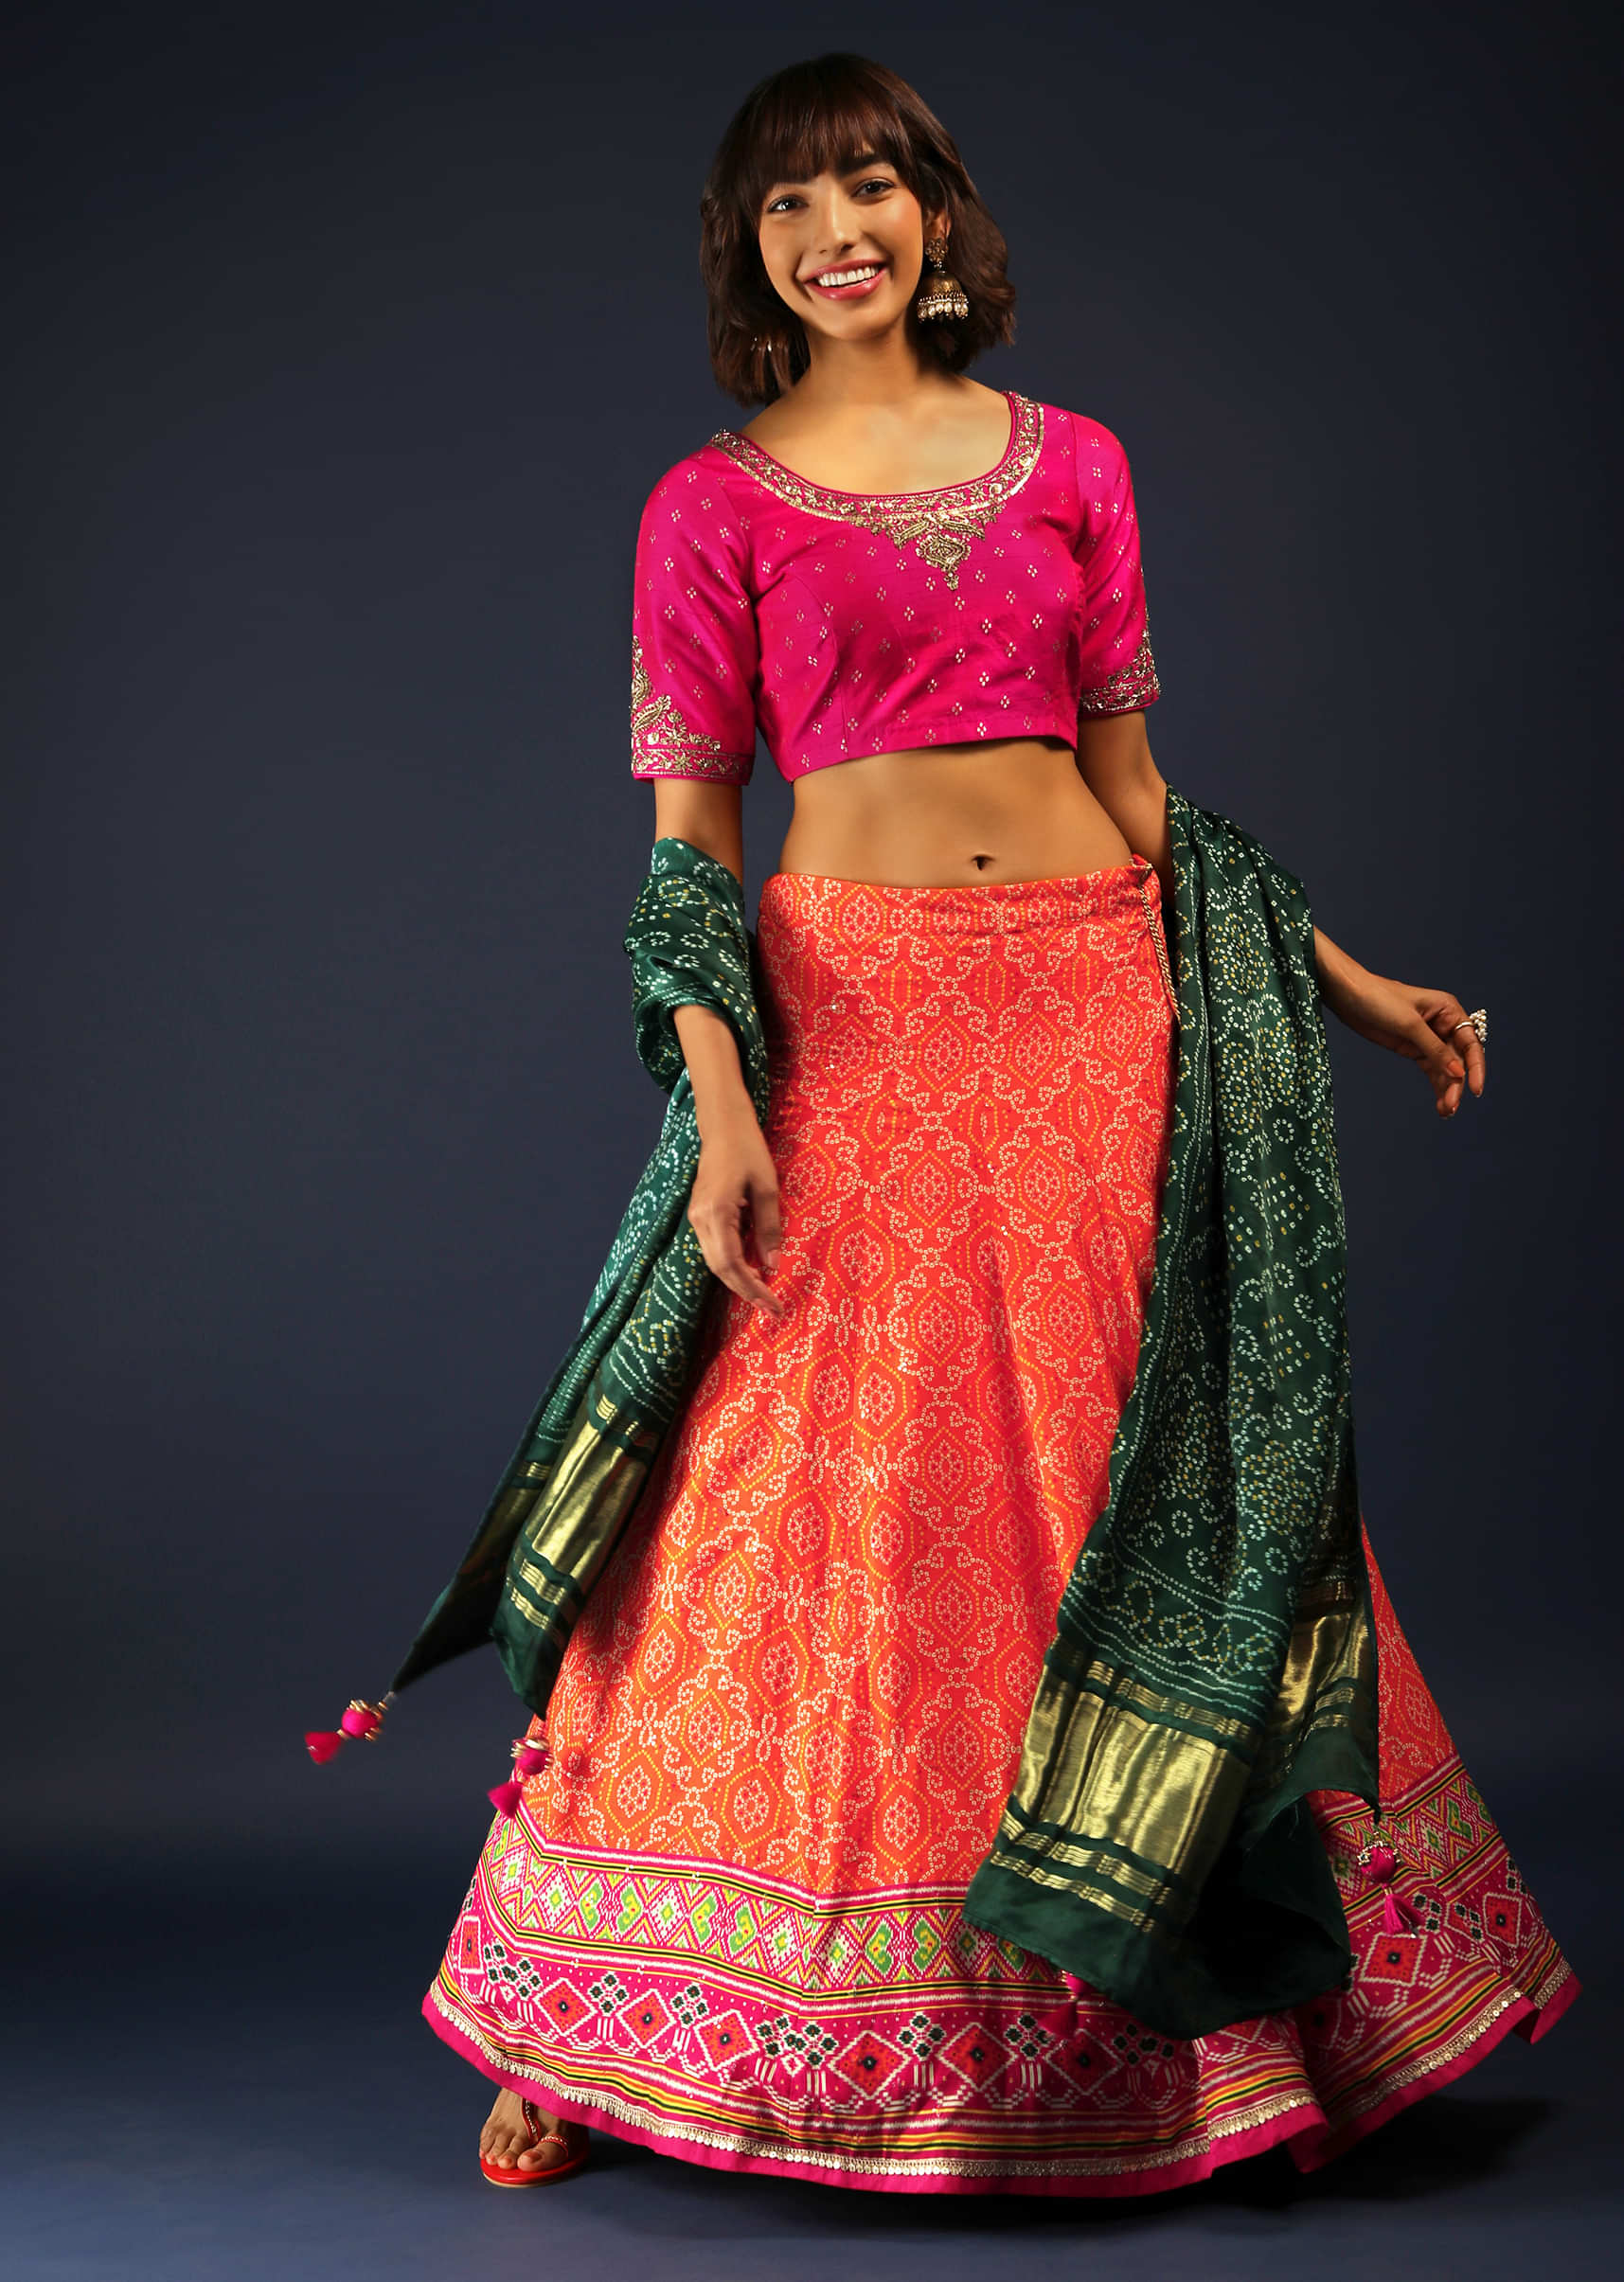 Details more than 155 pink lehenga with green dupatta best